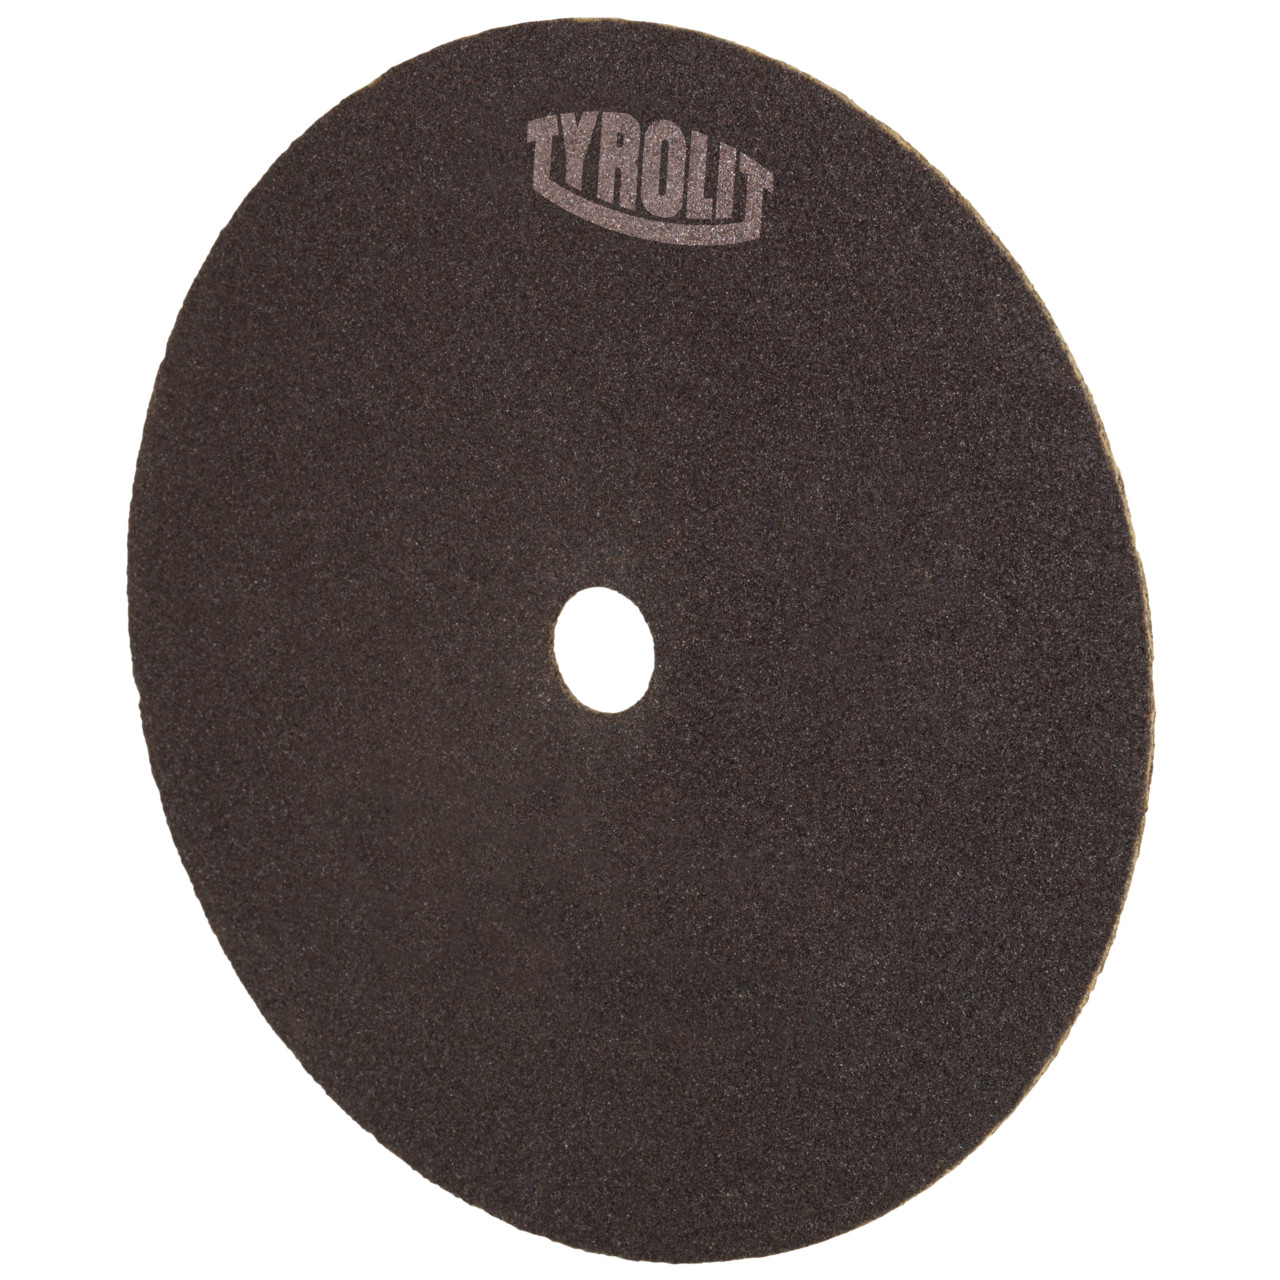 Tyrolit Cutting disc for cutting and saw sharpening DxDxH 100x1x20 For steel and HSS, shape: 41N - straight version (woven cutting disc), Art. 529392